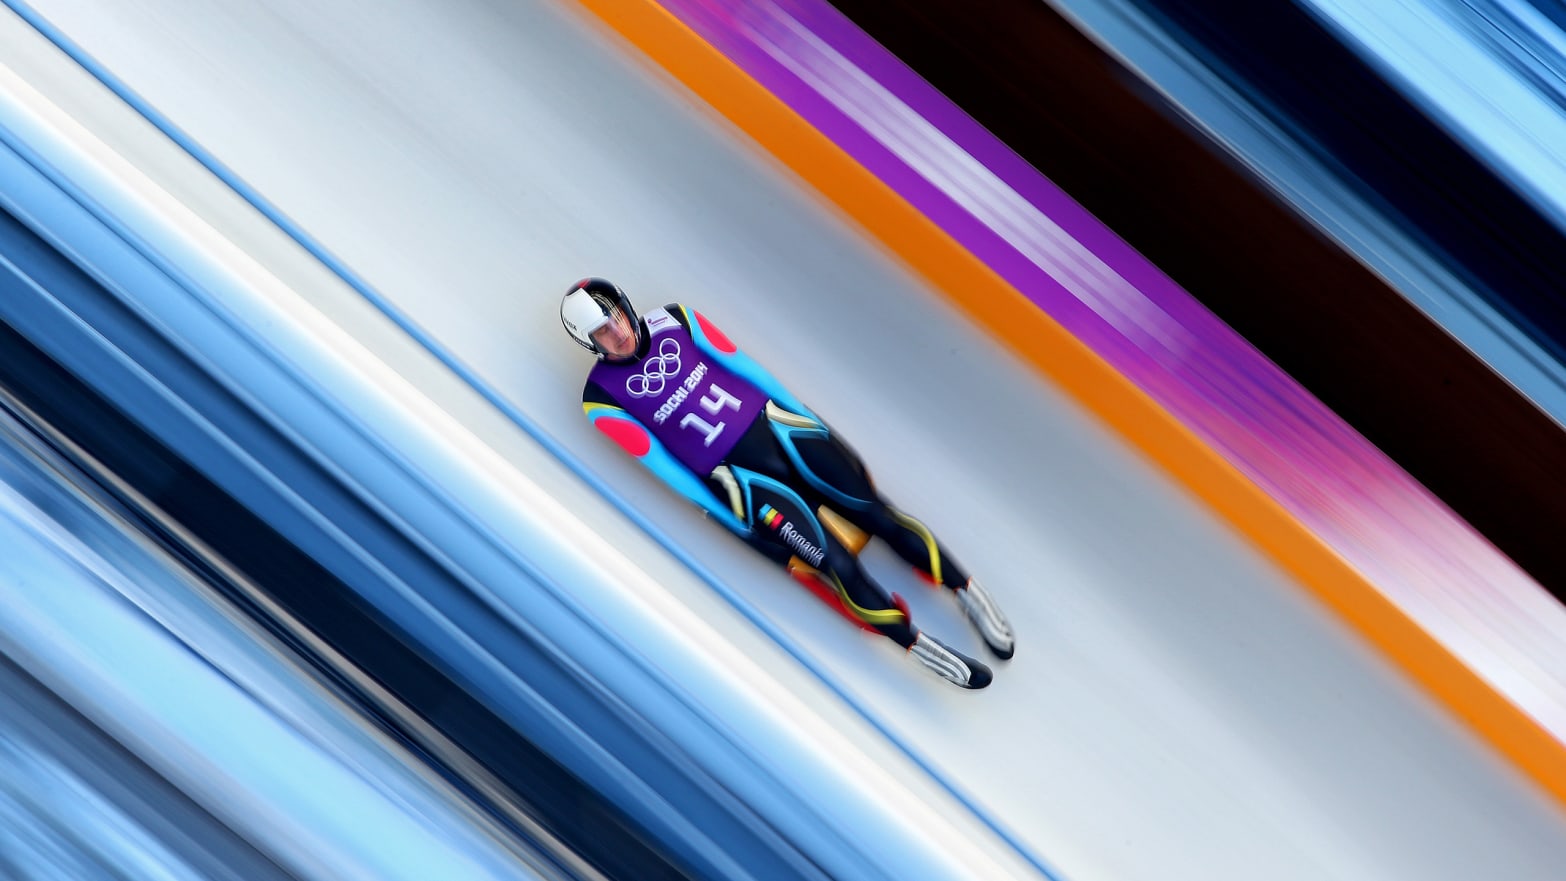 Luge 2018 Olympics: Full Schedule, How to Watch